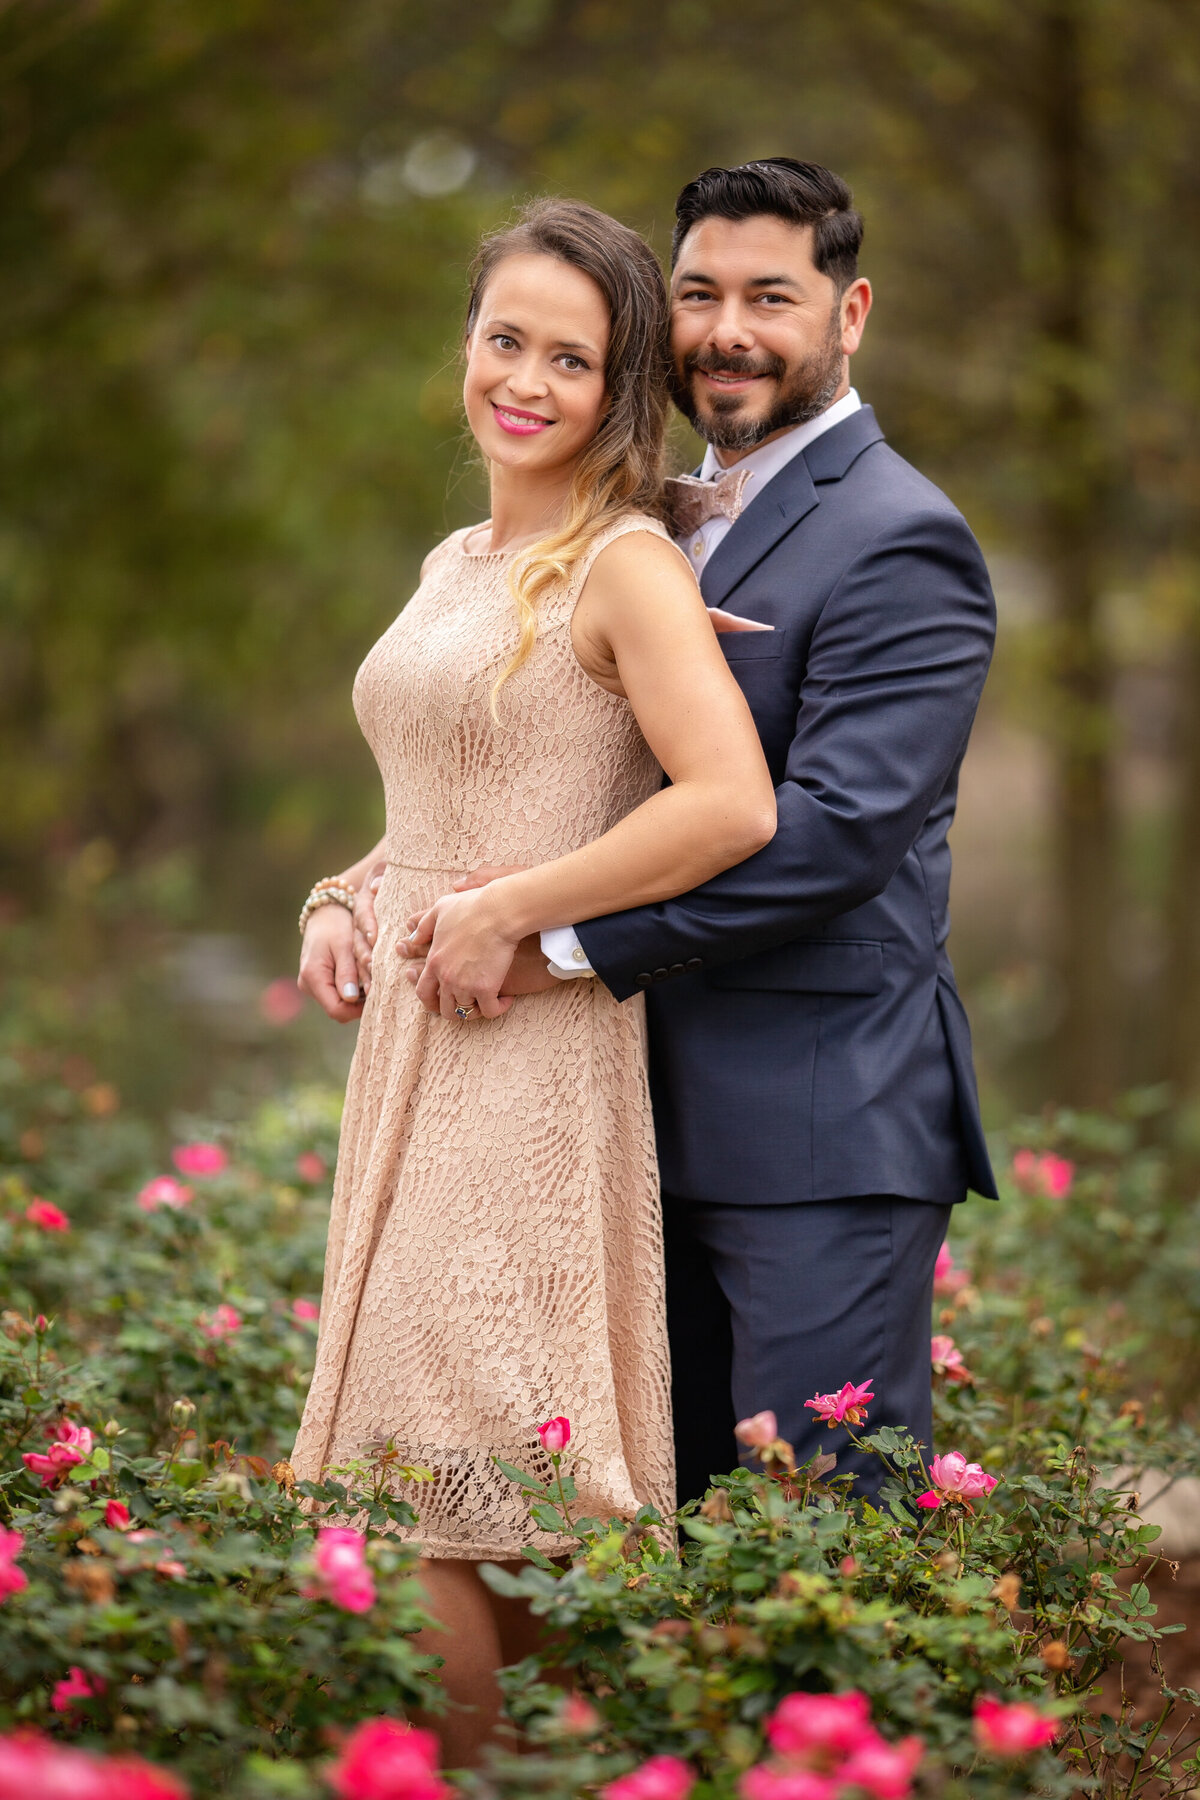 Man and woman standing in pink rose bushes.  Both are Hispanic.  He is wearing a navy blue suit and has a beard and moustache.  She has long brown hair with blonde ends and is wearing a blush dress.  She is leaning with her back to him and they are holding hands.  There are blurry trees in the background.  They are smiling at the camera.